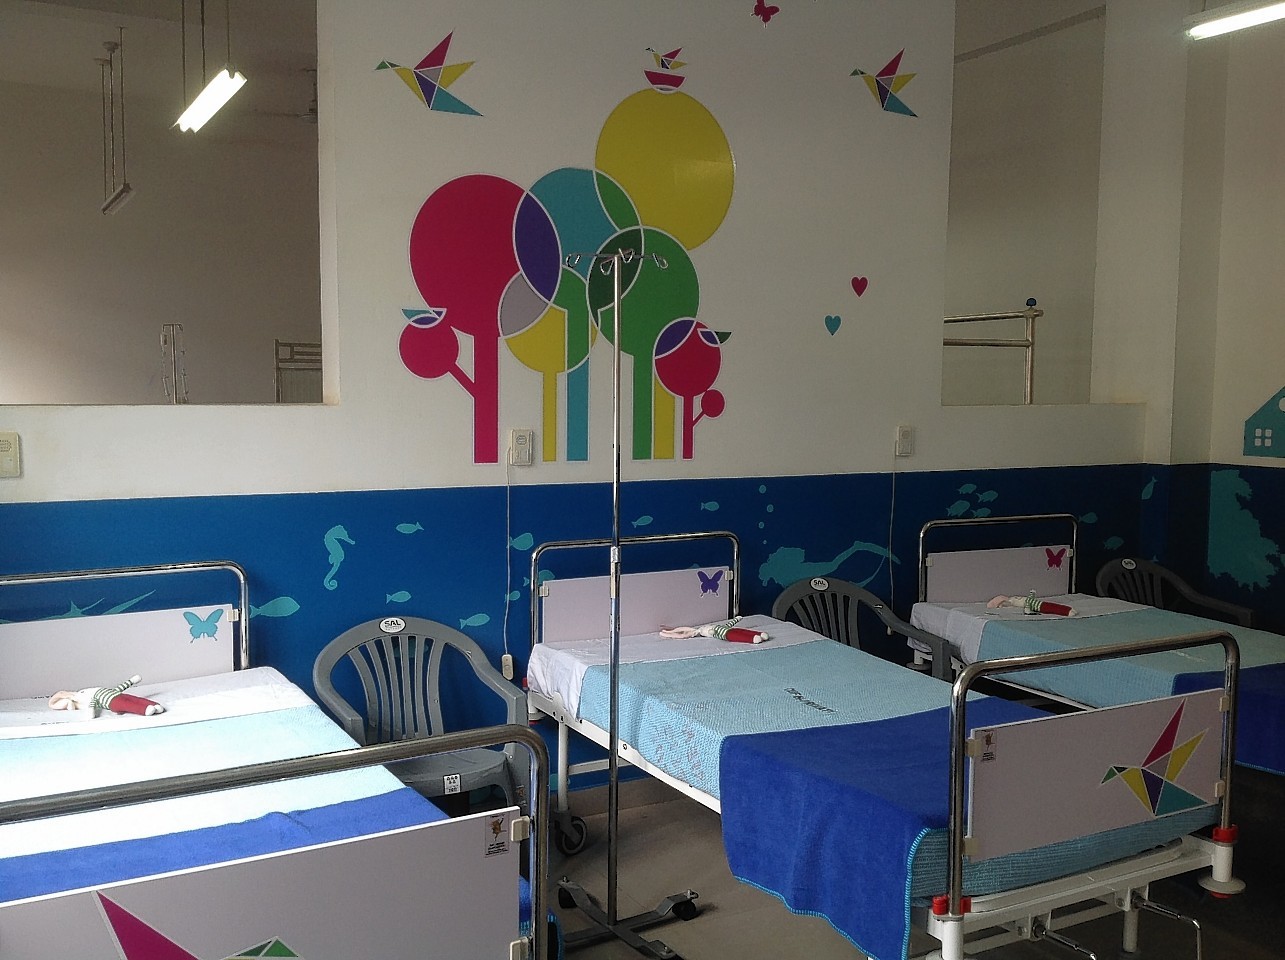 The new hospital ward built thanks to ARCHIE fundraising